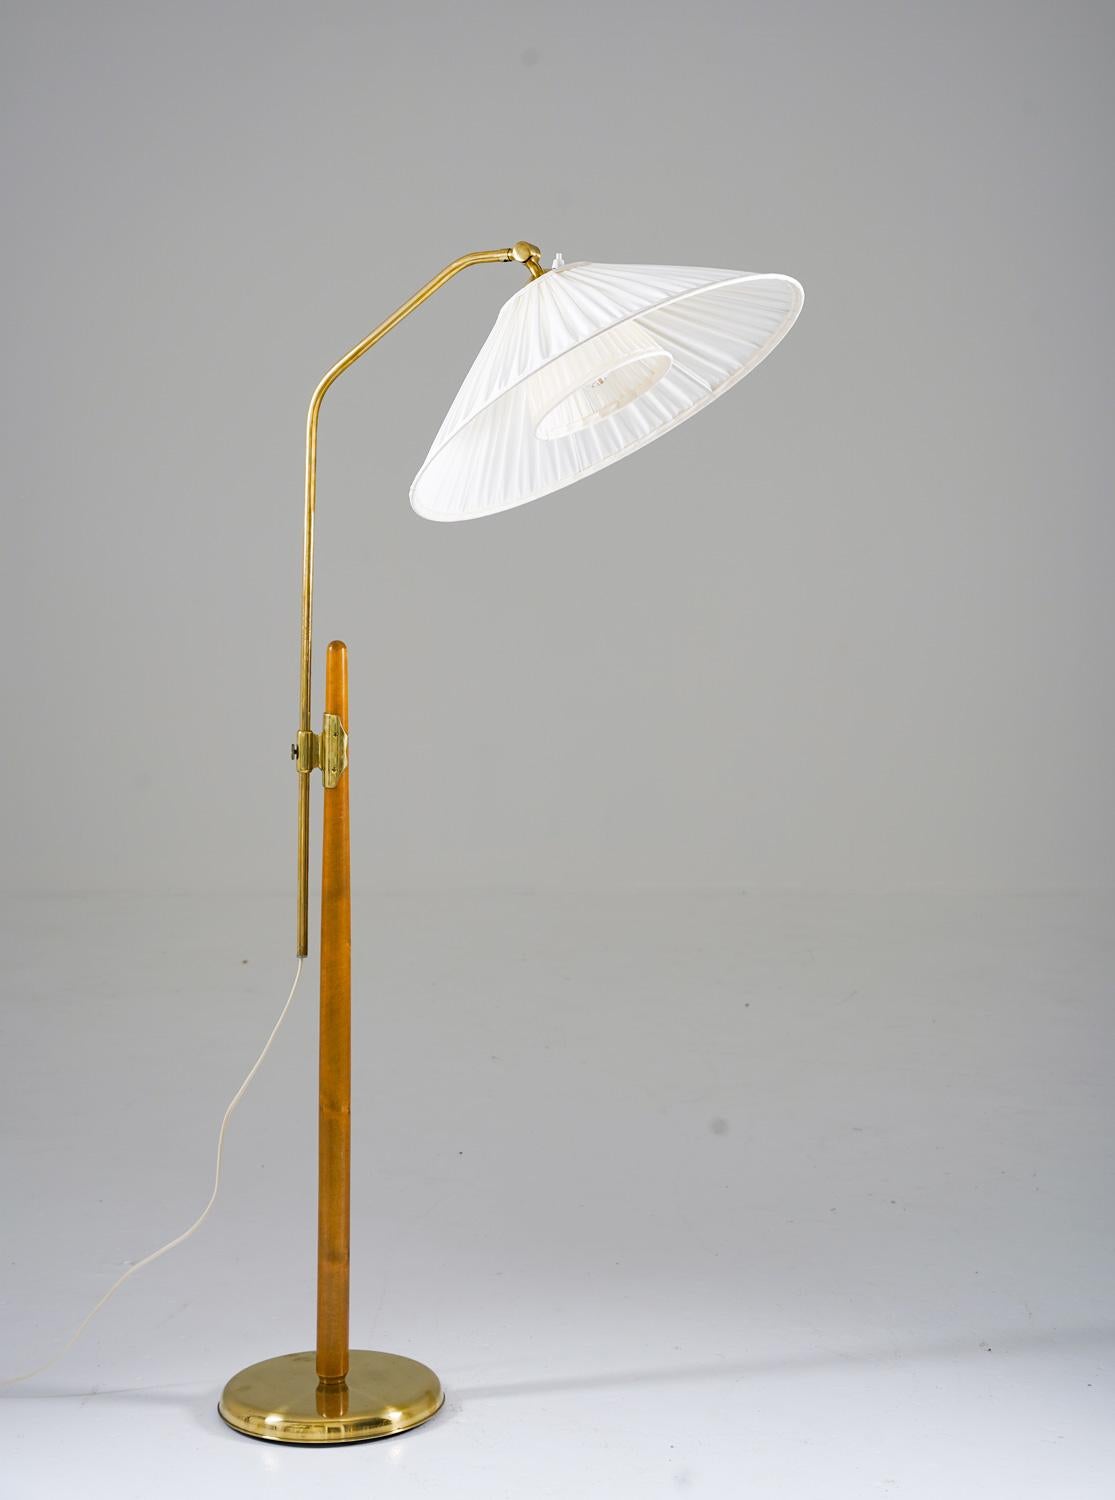 Lovely floor lamp manufactured by Liberty, 1940s. 
The lamp consists of a wooden pole, supporting a brass rod that is adjustable in height. 

Maximum height is 160cm (55